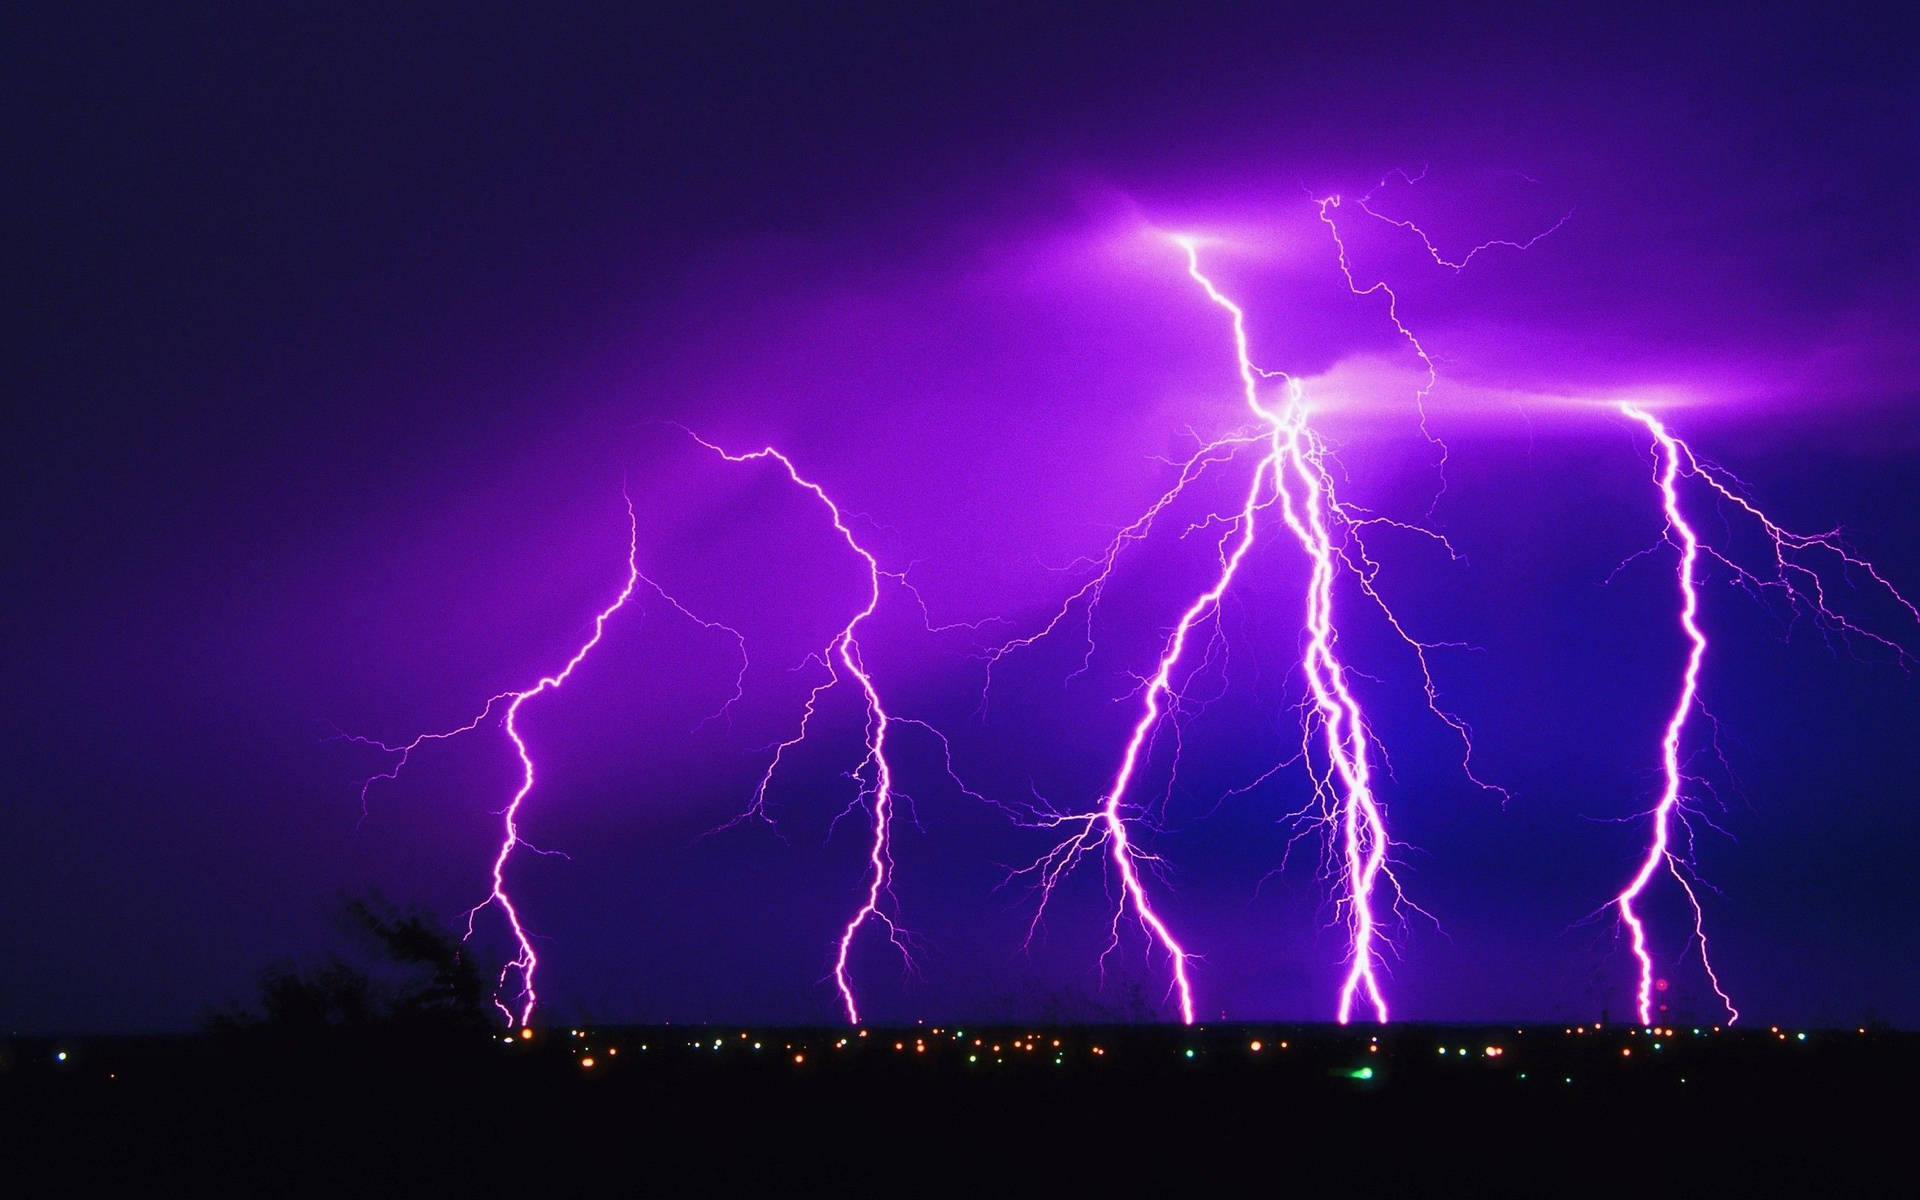 A brilliant and majestic display of Aesthetic Lightning. Wallpaper